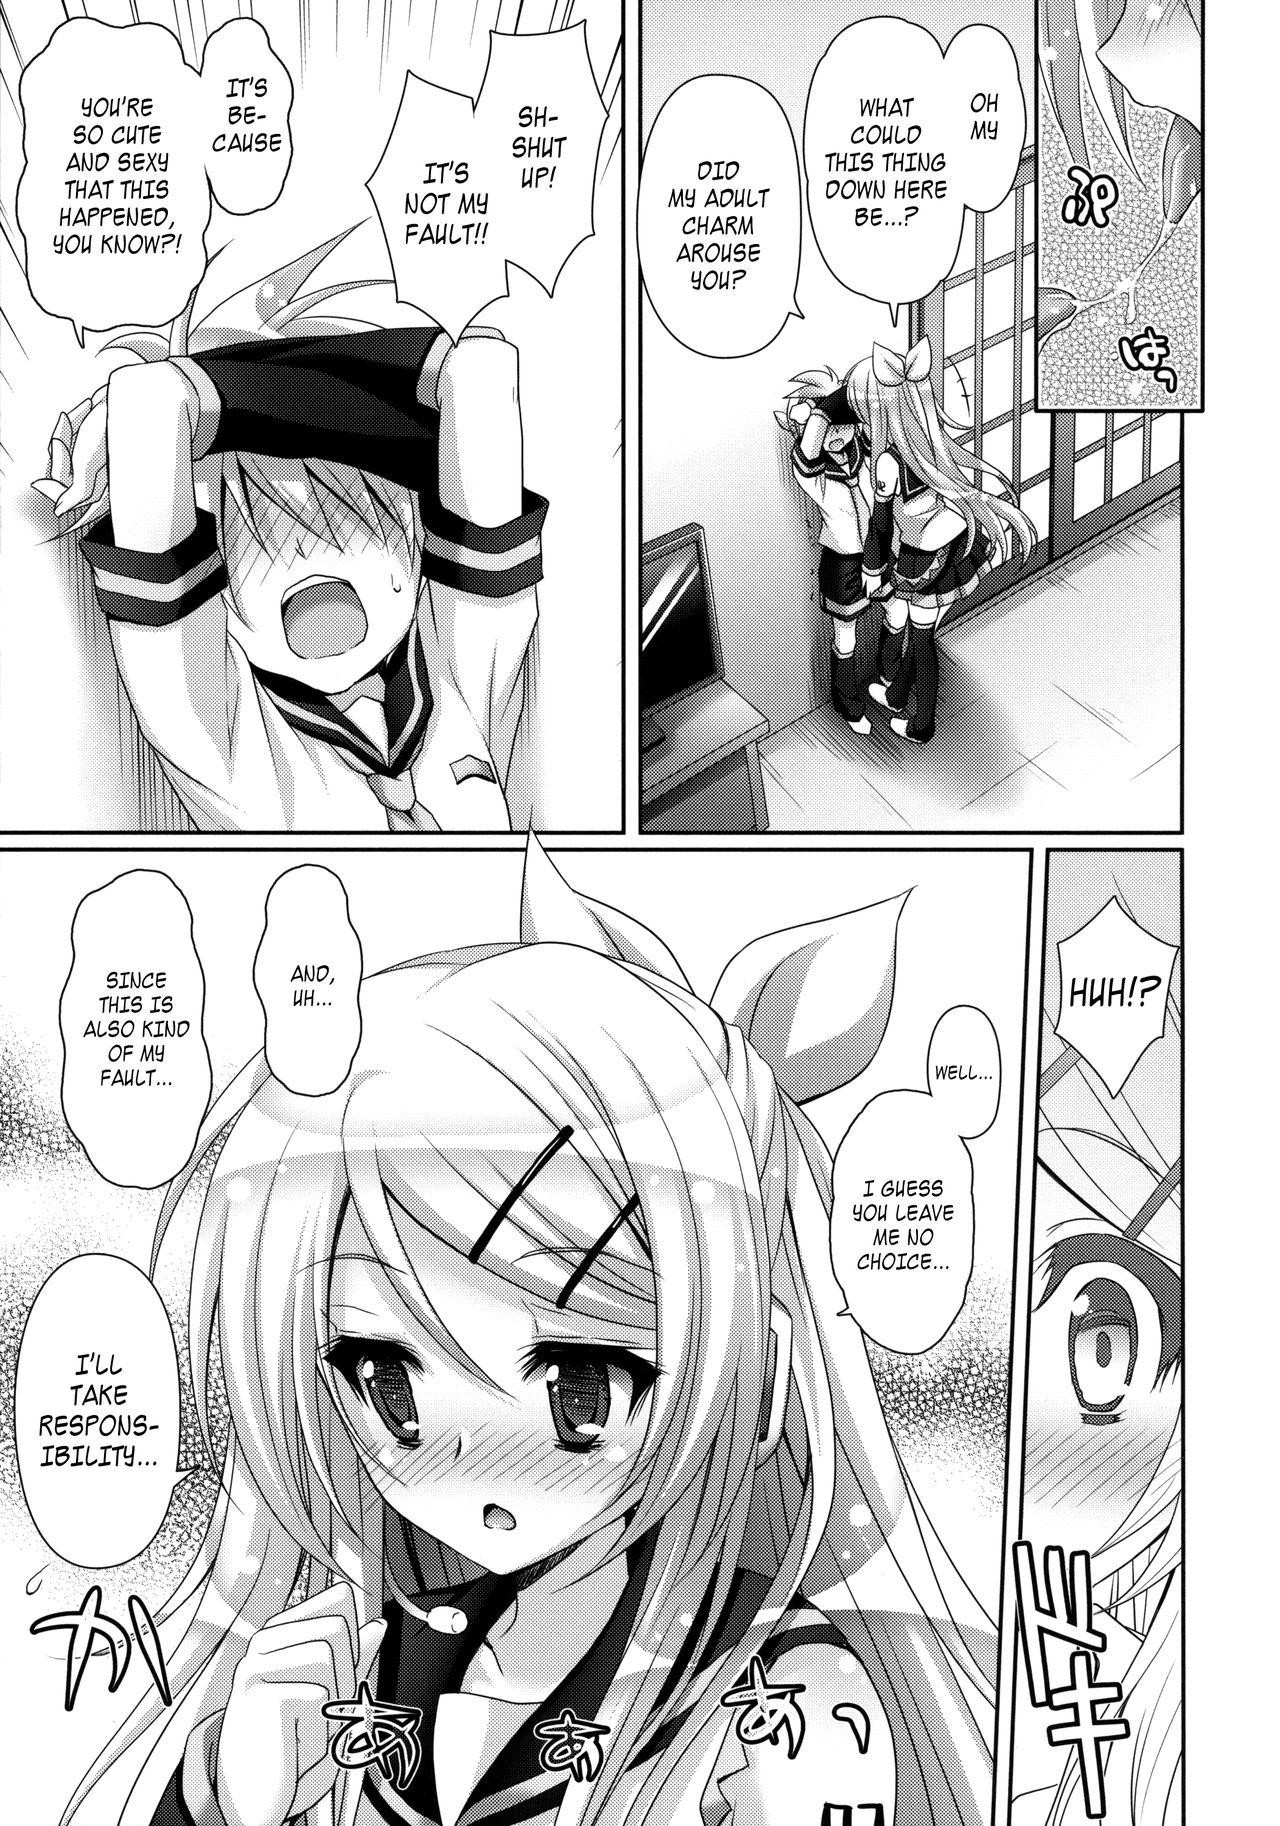 Analfucking Rin-san Now! - Vocaloid Cunt - Page 11